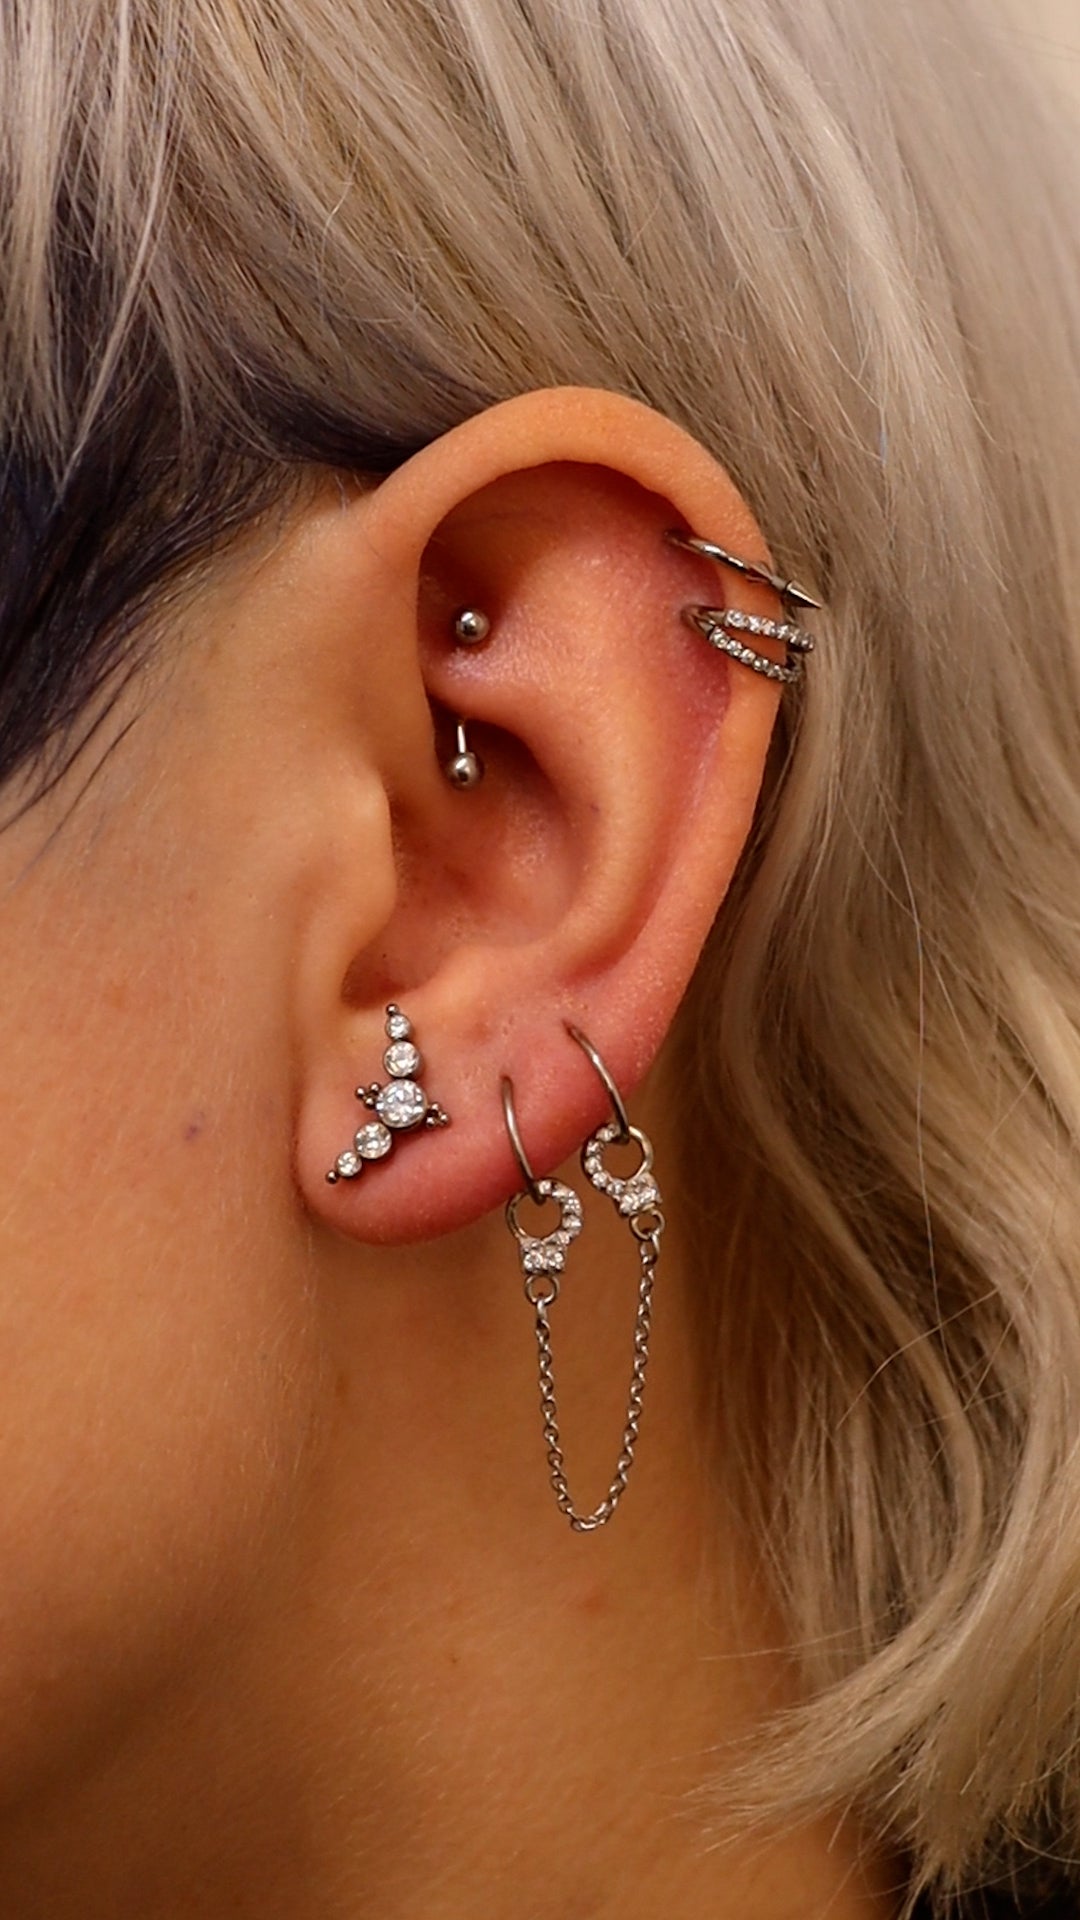 Everything you need to know about getting your new Cartilage Piercing